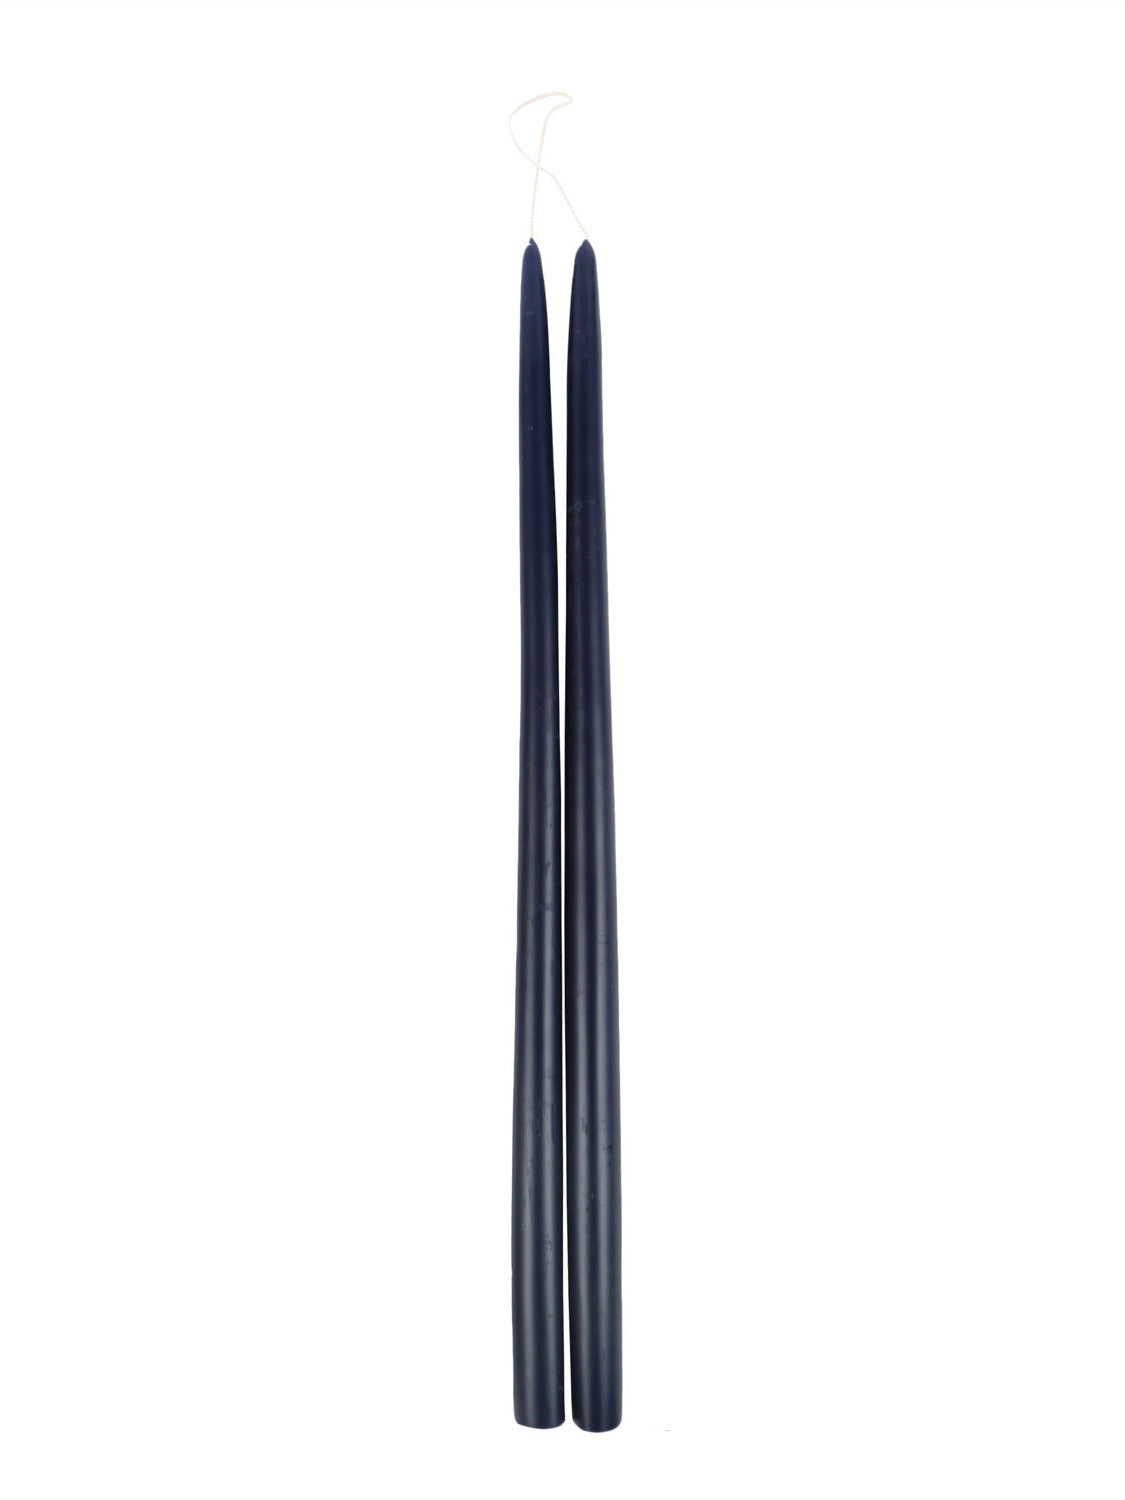 Taper Candles (Set of 2)